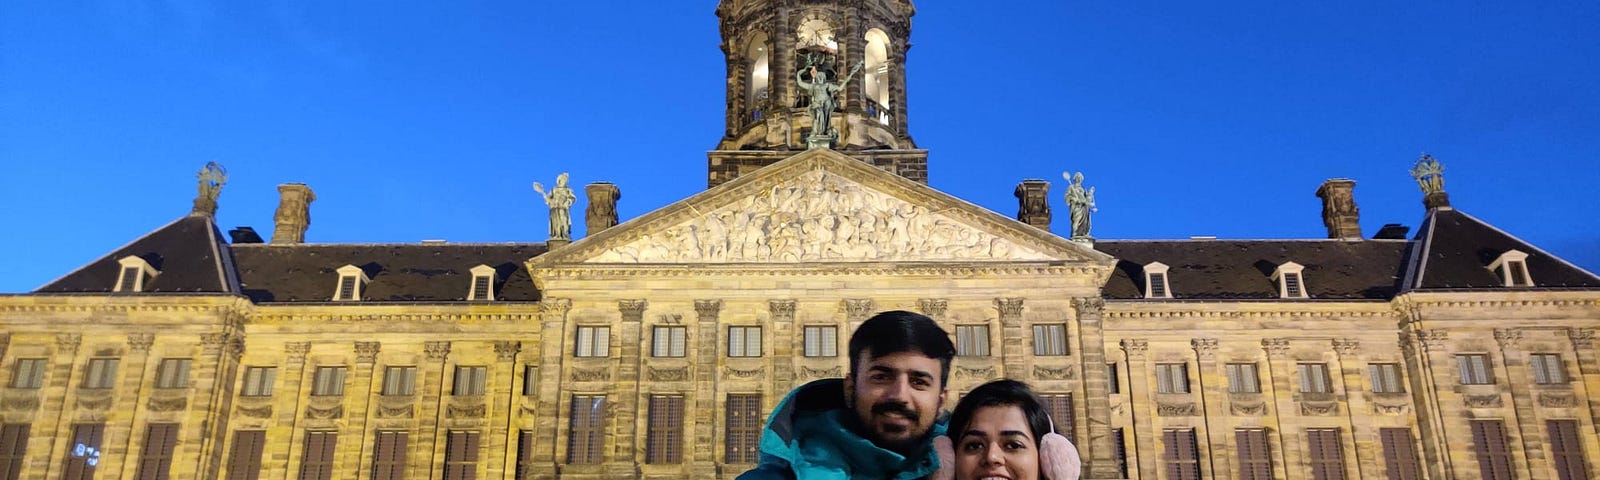 Me, with my husband at Dam Square — Amsterdam (Image Credits: Author’s Own Photo)